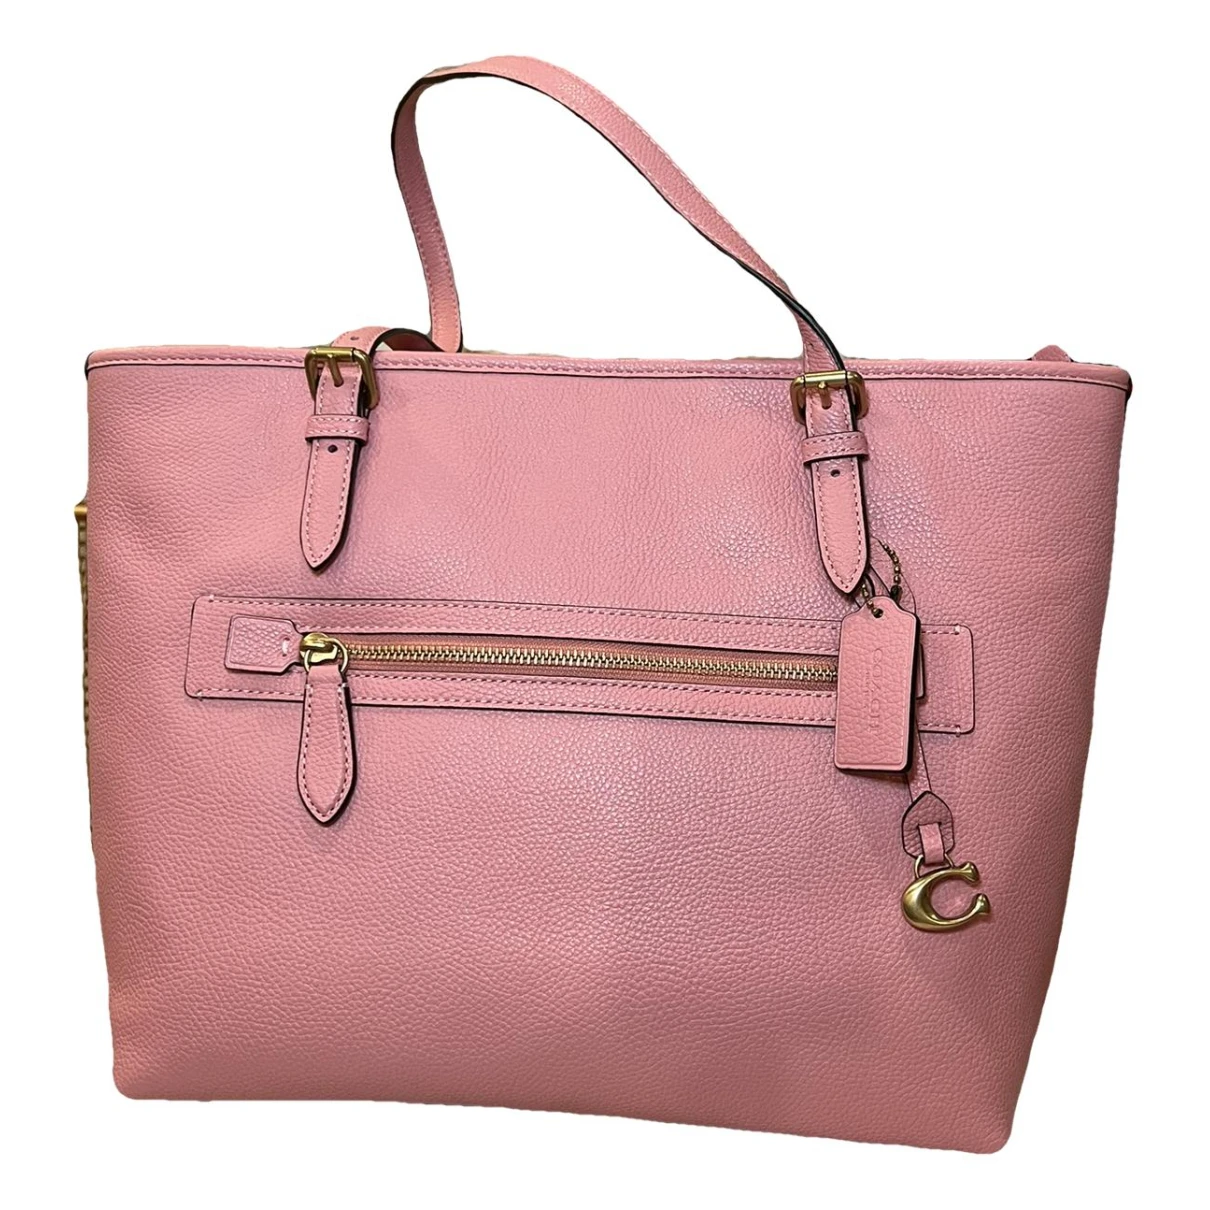 Pre-owned Coach Leather Handbag In Pink